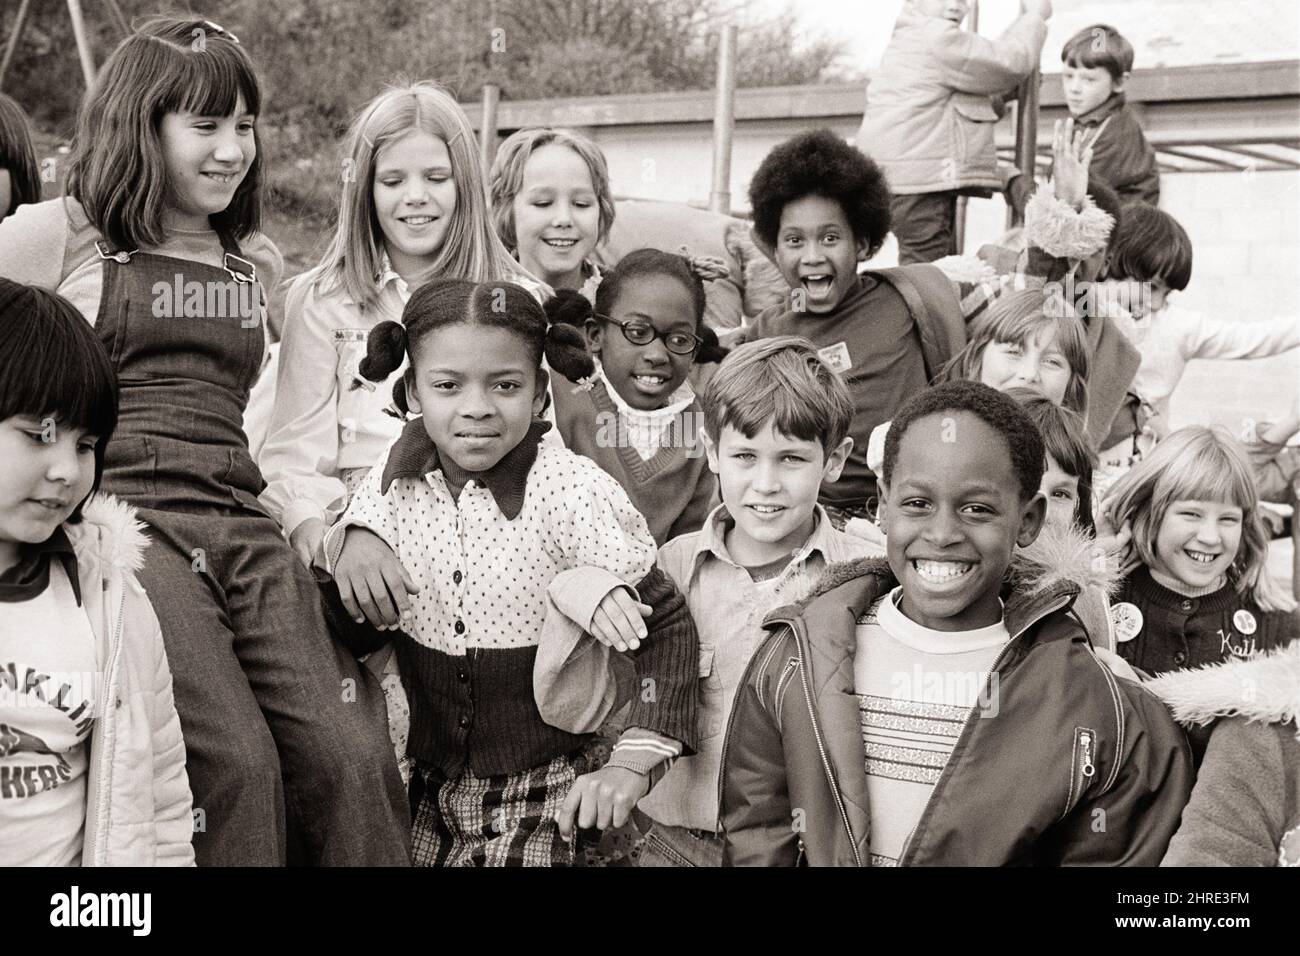 1970s GROUP OF DIVERSE SCHOOL CHILDREN OUT FOR RECESS IN PLAYGROUND POSING FOR A GROUP PORTRAIT SMILING  - j14363 HAR001 HARS LAUGH SPANISH DIFFERENT PLEASED JOY LIFESTYLE SATISFACTION FEMALES COPY SPACE FRIENDSHIP HALF-LENGTH PERSONS MALES CONFIDENCE B&W EYE CONTACT SCHOOLS GRADE HAPPINESS CHEERFUL ORIENTAL AFRICAN-AMERICANS AFRICAN-AMERICAN EXCITEMENT RECESS RECREATION BLACK ETHNICITY ASIAN AMERICAN POSING PRIMARY SMILES JOYFUL VARIOUS VARIED ASIAN-AMERICAN GRADE SCHOOL GROWTH PRE-TEEN PRE-TEEN BOY PRE-TEEN GIRL TOGETHERNESS BLACK AND WHITE CAUCASIAN ETHNICITY HAR001 HISPANIC ETHNICITY Stock Photo